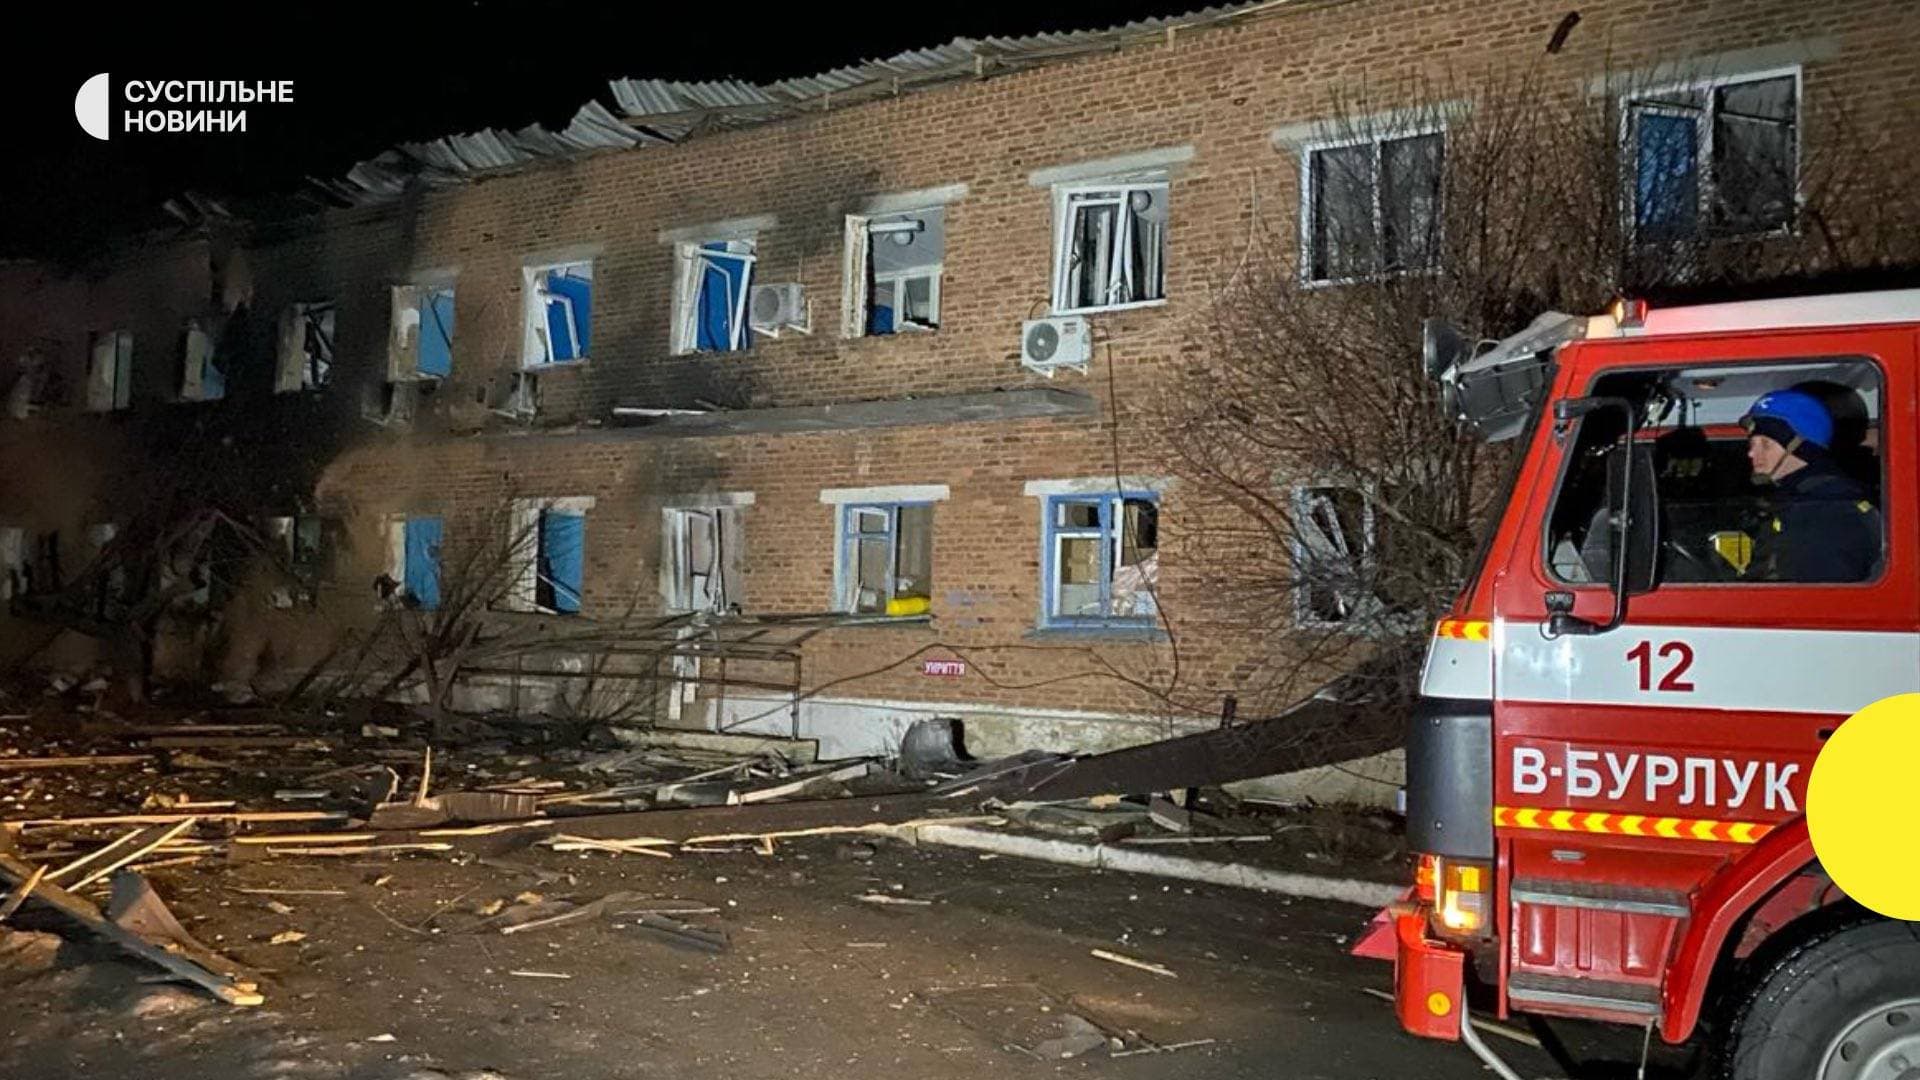 a fire truck next to a building damaged following a bomb blast at a hospital in Velykiy Burluk